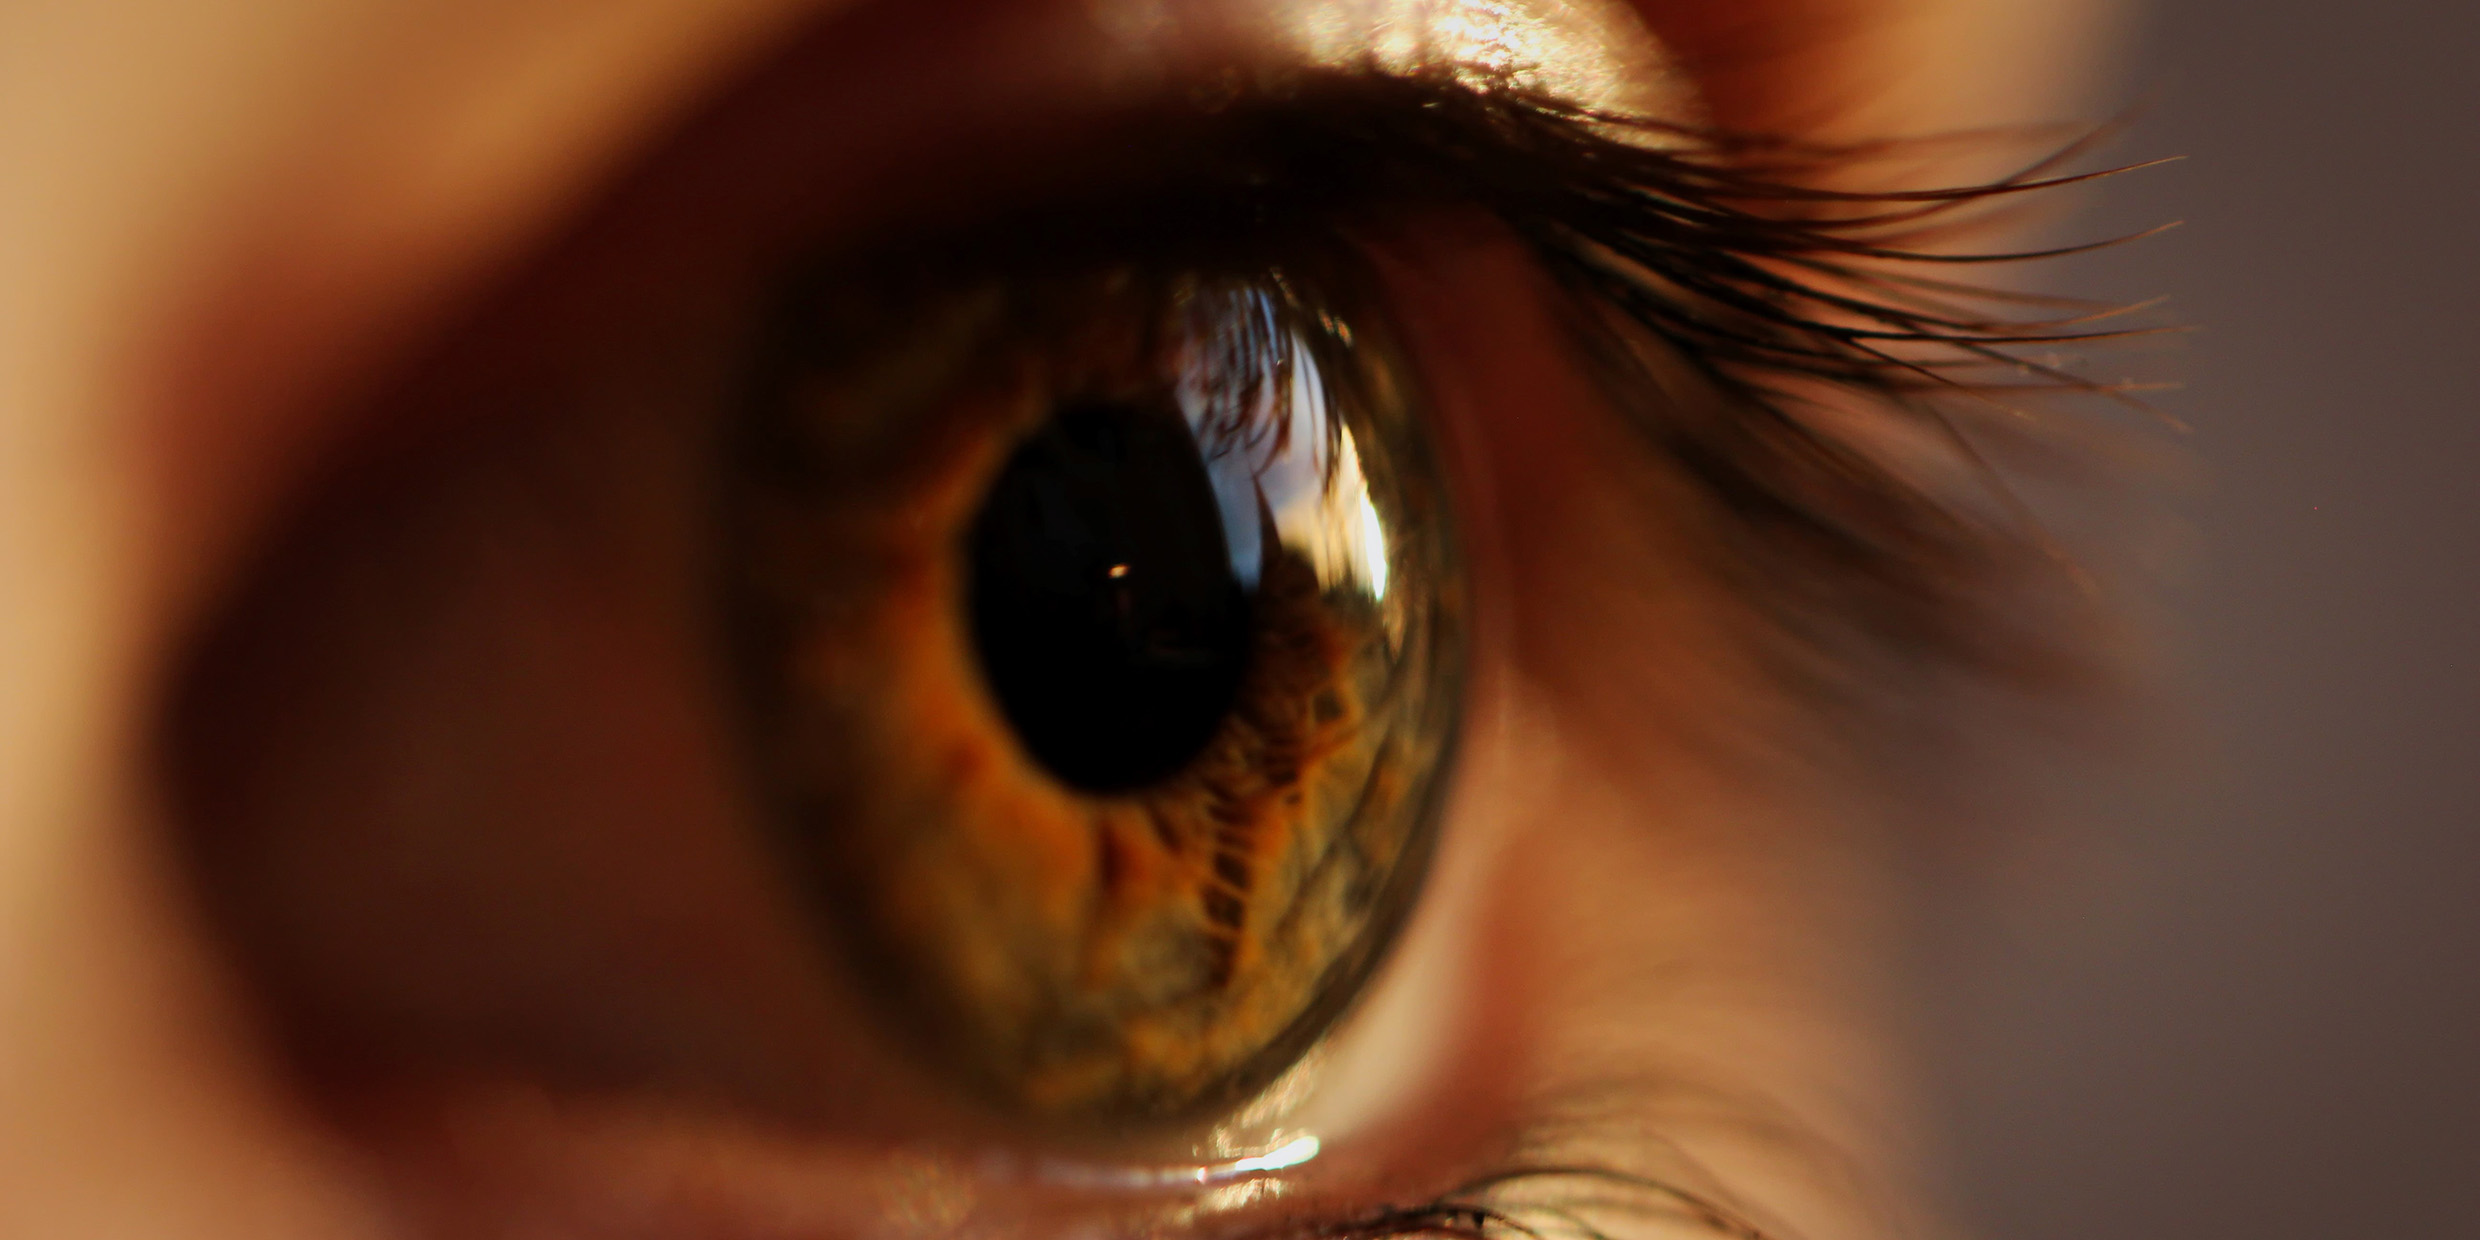 Close up image of a person's eye